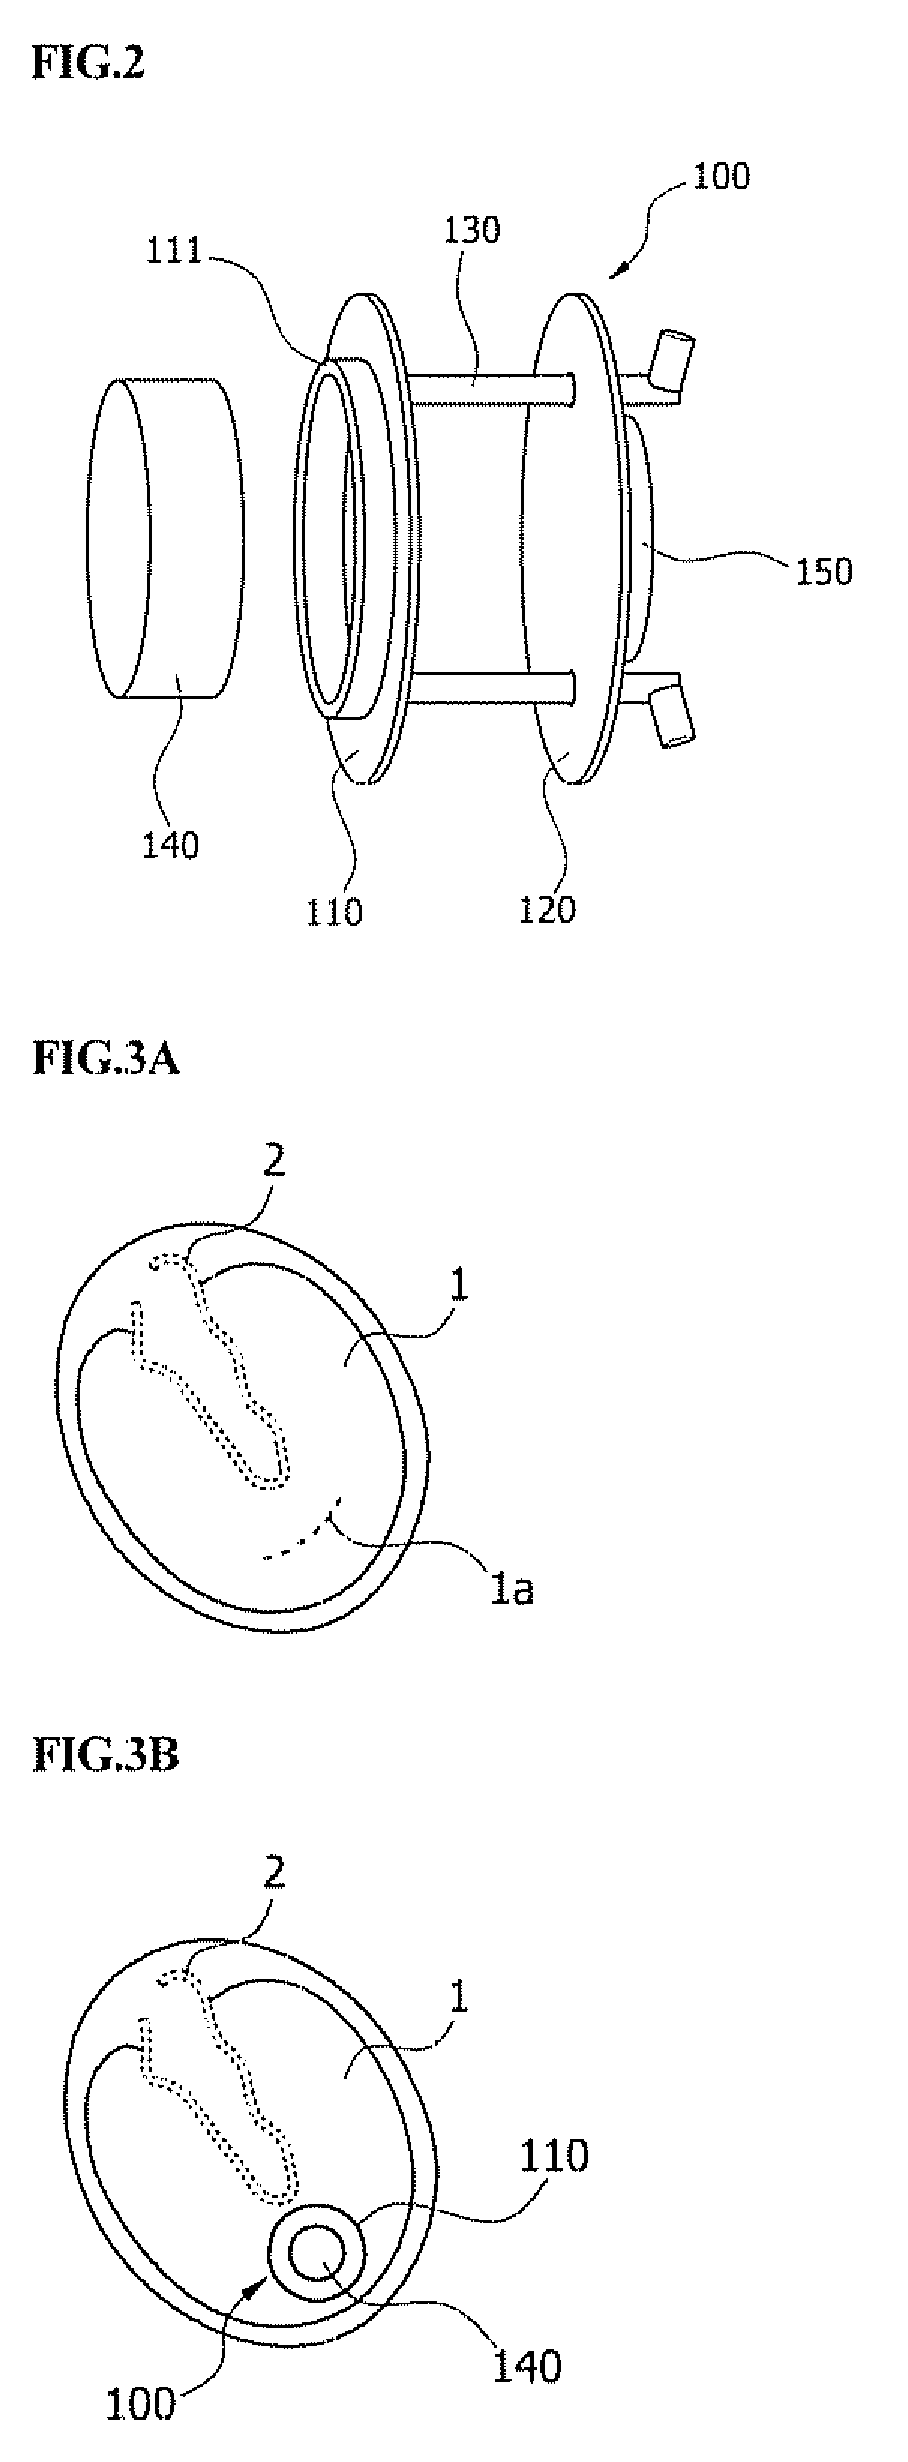 Transtympanic vibration device for implantable hearing aid and apparatus for installing the same